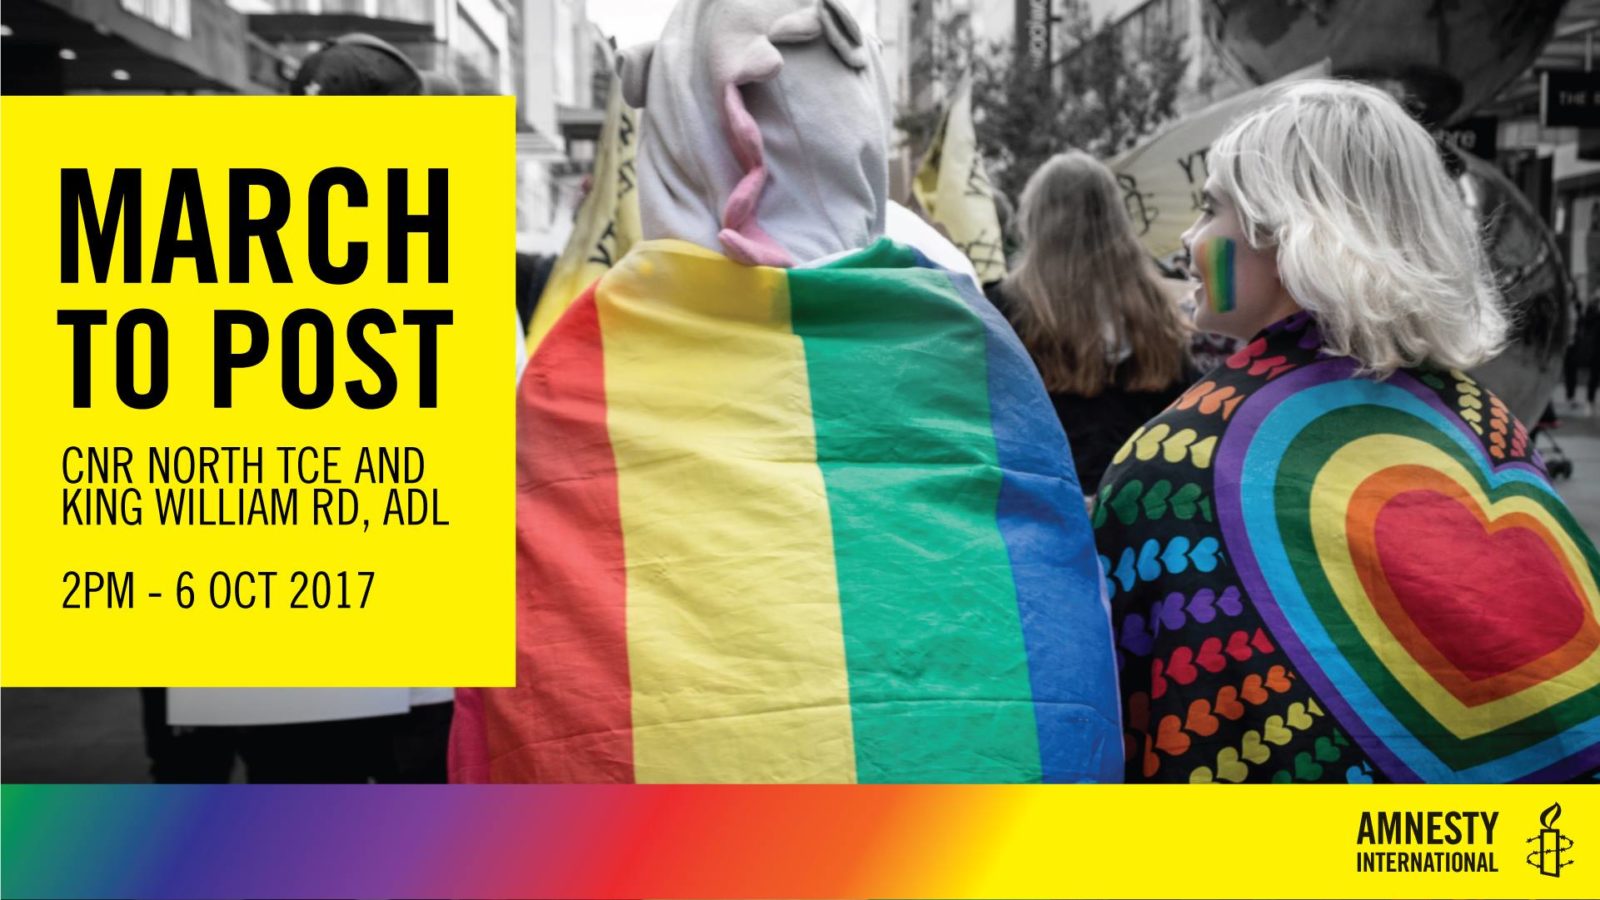 Campaign poster saying March to Post on the left and the back of two people with rainbow flags on them